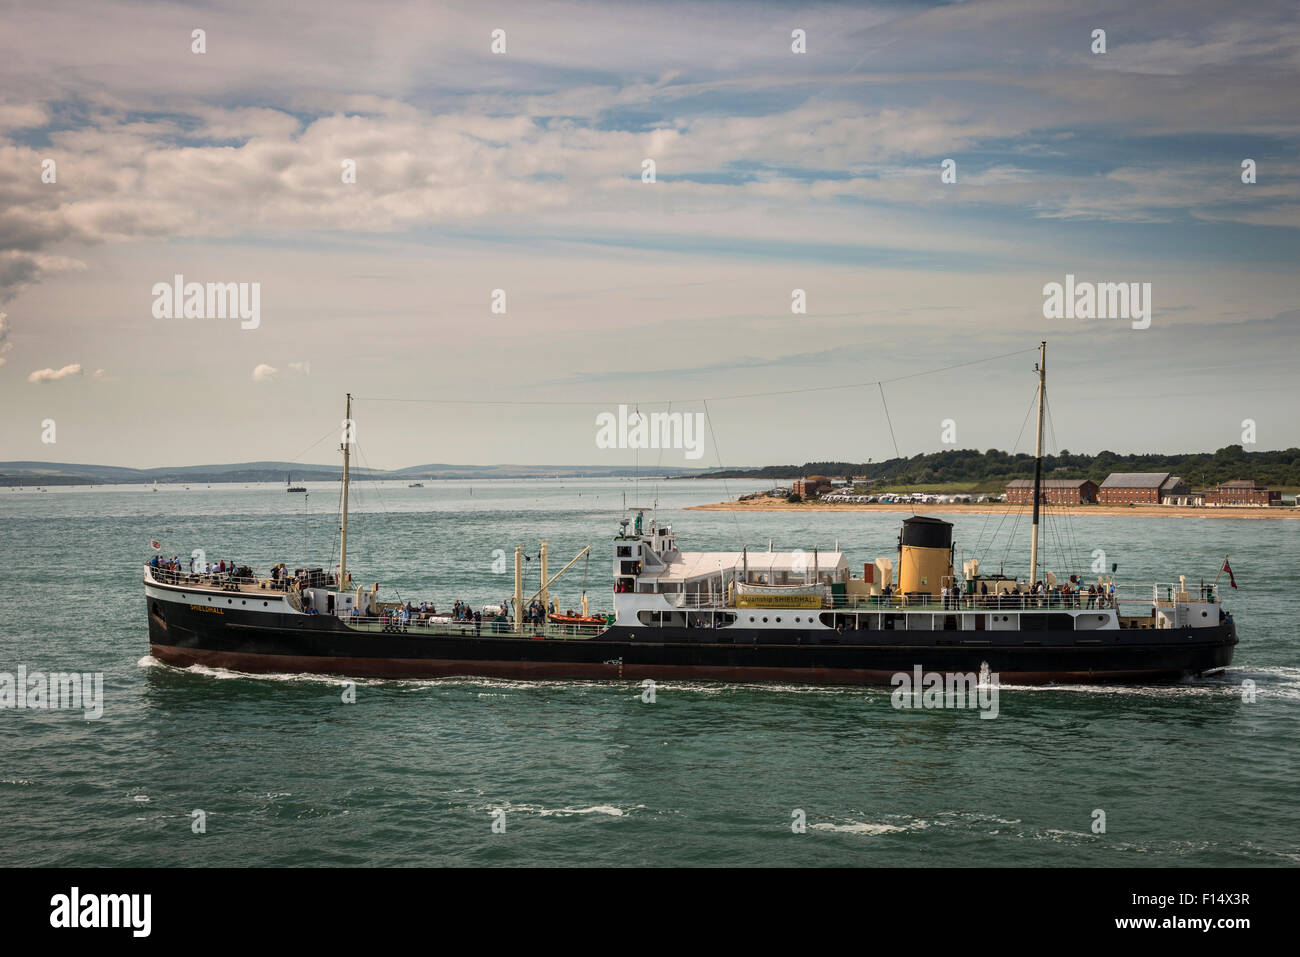 The Steamship Shieldhall sailing on the Solent, Hampshire, UK Stock Photo